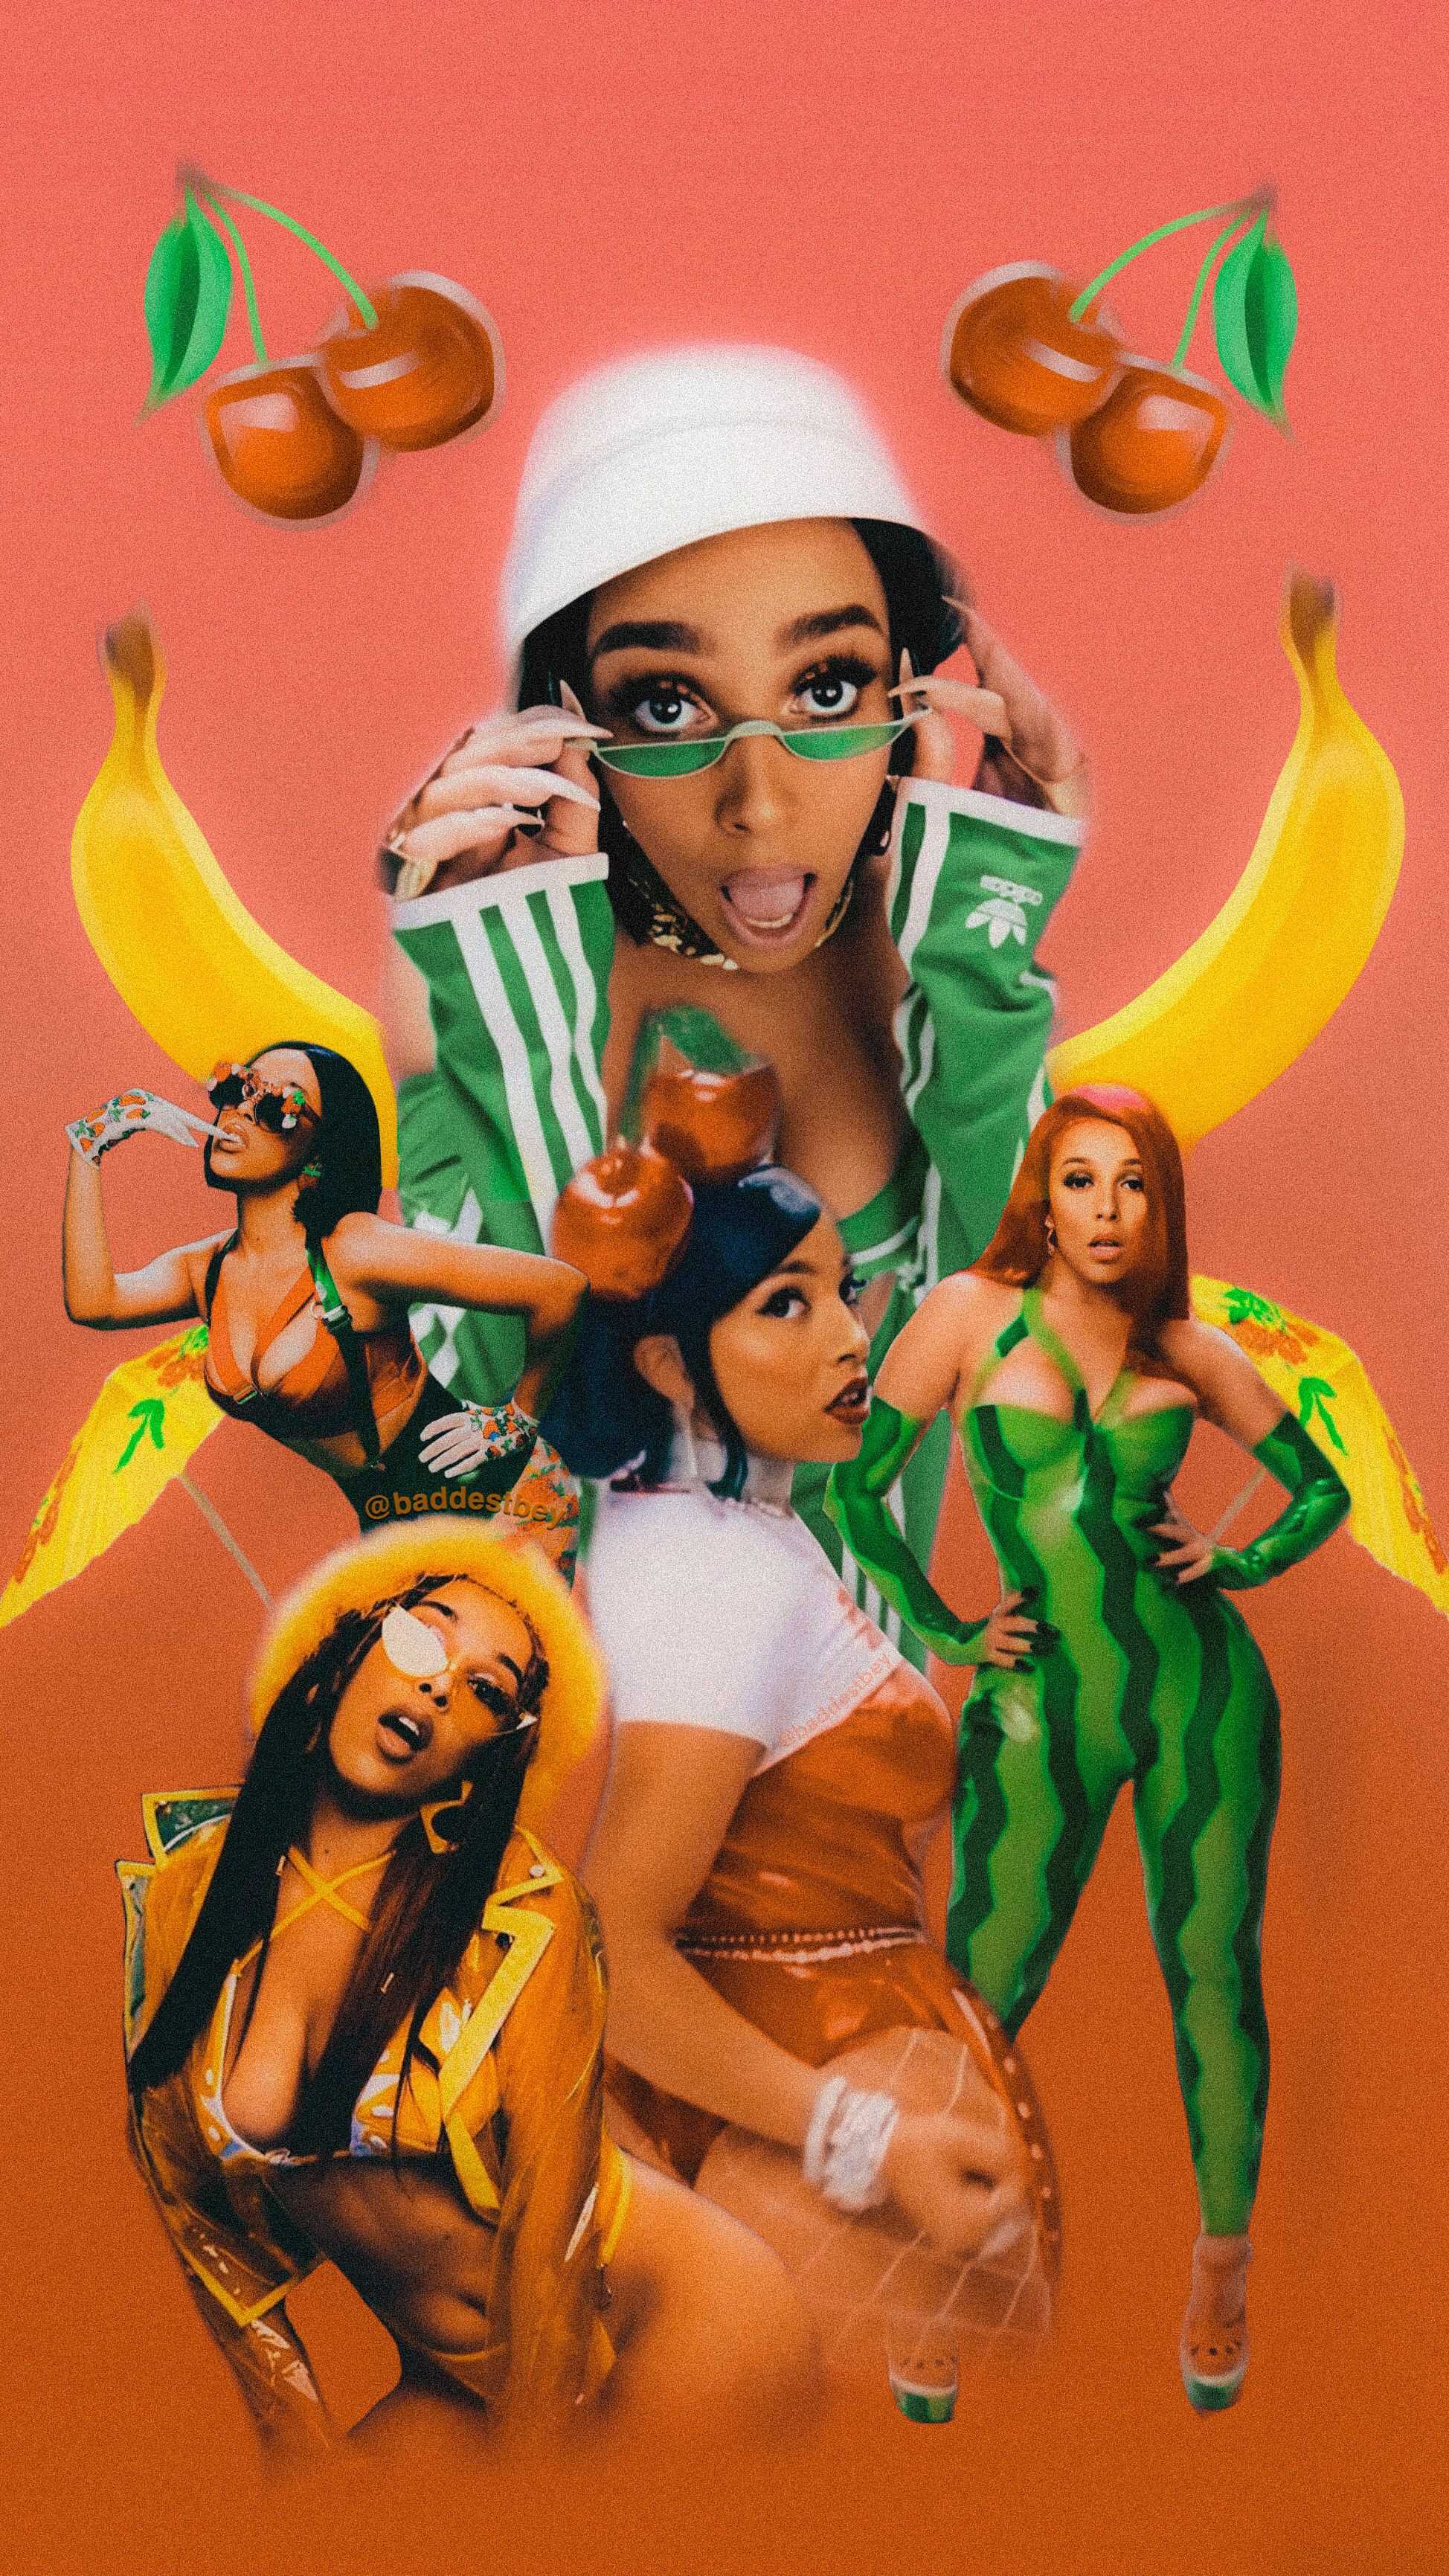 A collage of Cardi B with fruit and cherry imagery - Doja Cat